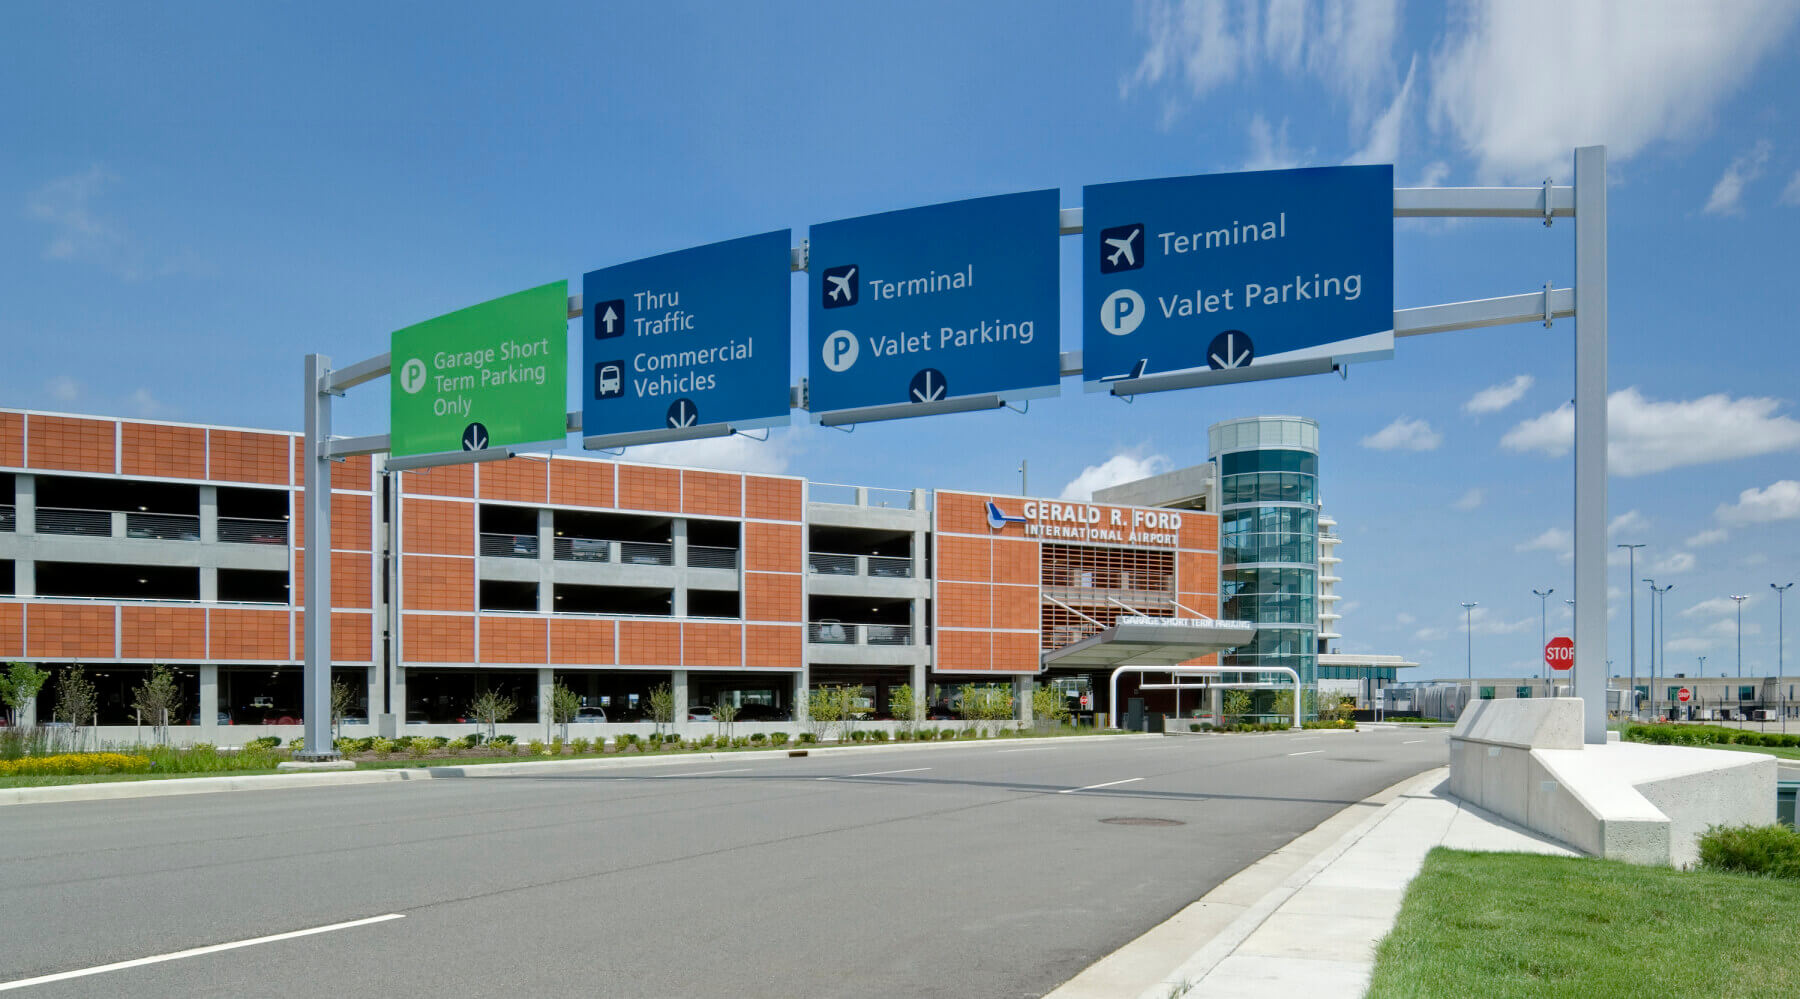 overhead directional signage on the roadway leading to the Gerald R. Ford International Airport parking garage